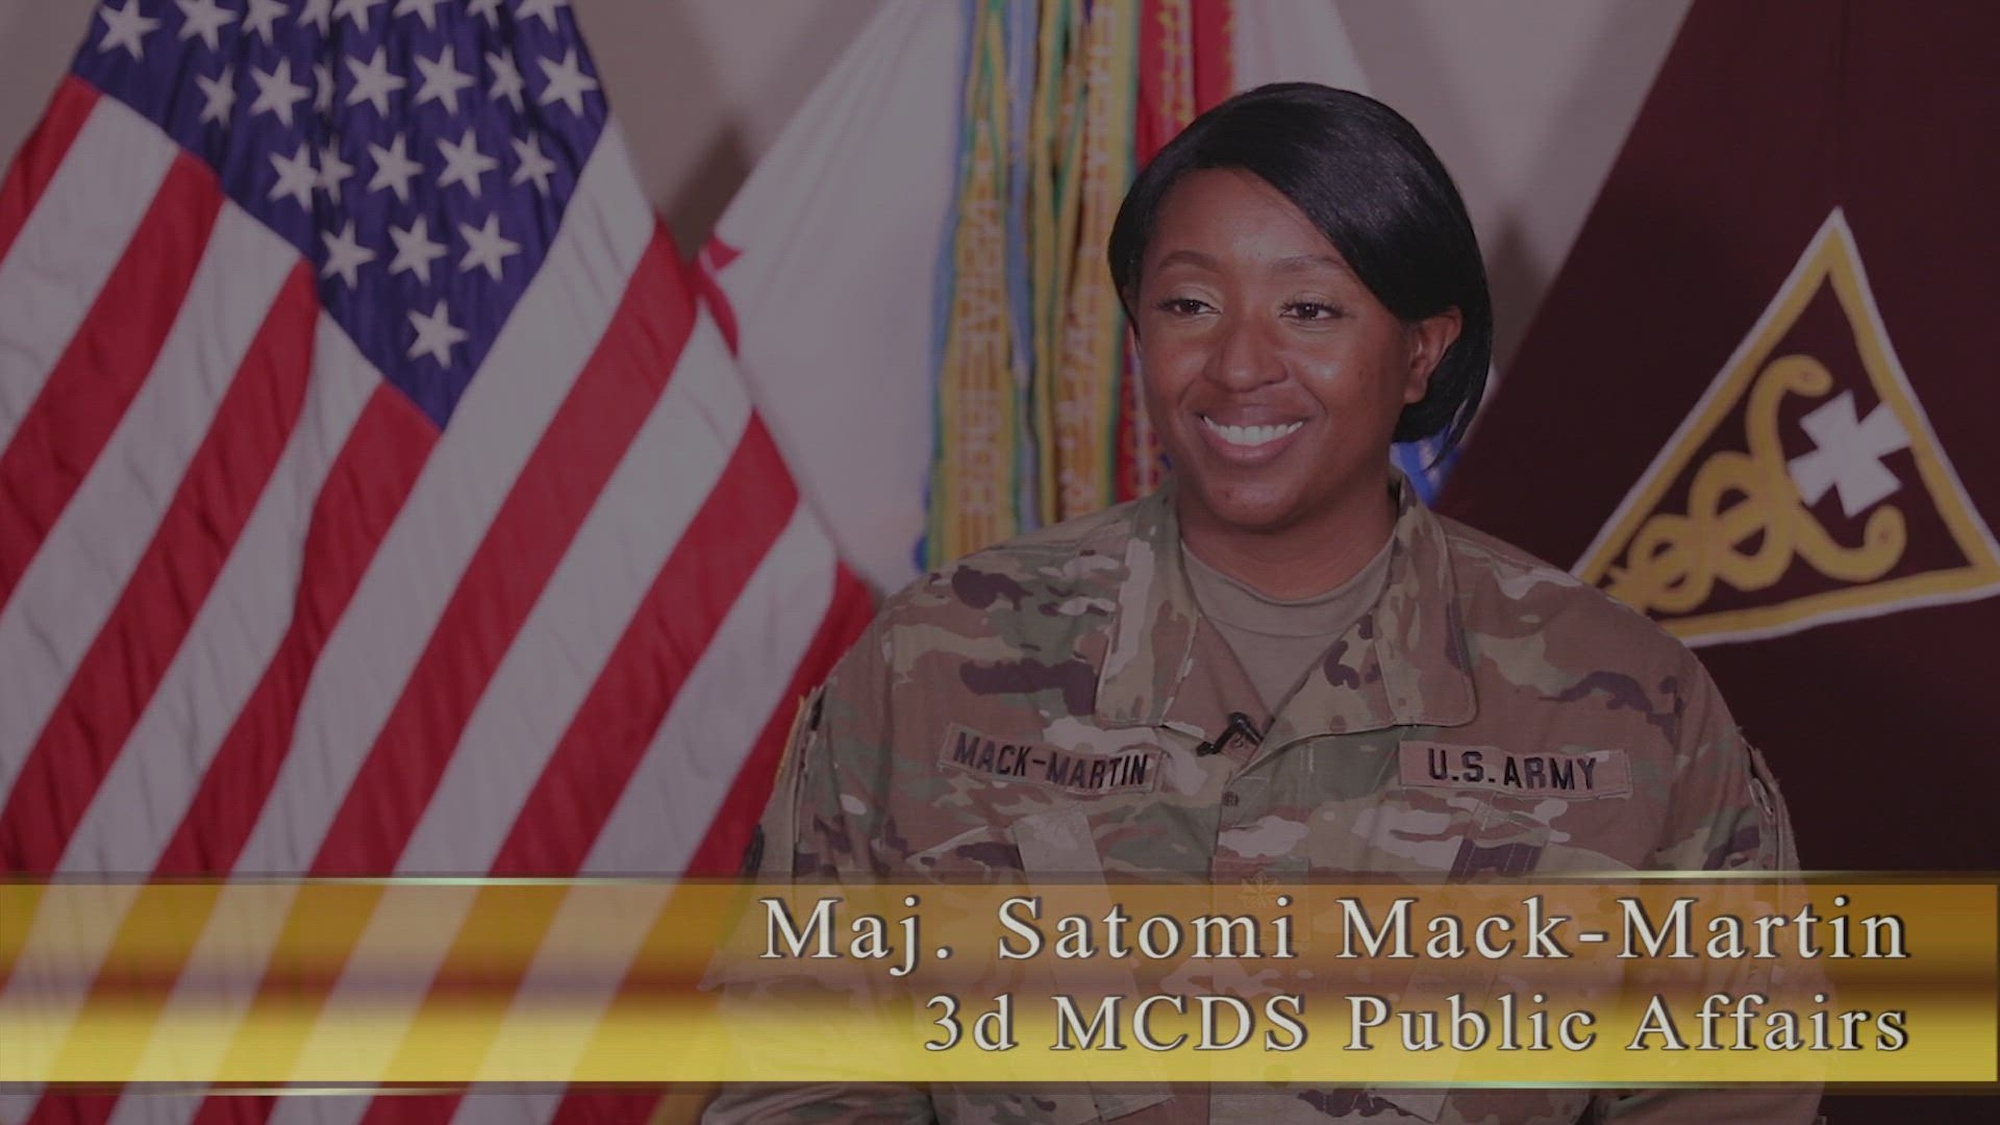 Maj. Satomi Mack-Martin, public affairs officer with the 3d Medical Command Deployment Support, describes her journey after serving 23 years in the Army Reserve.  

"My civilian and military career have really benefited one another," states Maj. Mack-Martin.

After attending film school at USC School of Cinematic Arts in Los Angeles, Calif., she transitioned her Army Reserve career to working within public affairs.

"For me, with being in public affairs," she stated, "I've been able to bring a sense of storytelling to the products I've created here."

Mack-Martin previously deployed to Baghdad, Iraq, as a finance officer where she oversaw a $2.1 billion dollar budget.

"As a young soldier in Iraq, I used my platform to tell stories," she shares.

Mack-Martin states she hosted events in Saddam Hussein's palace theater to help soldiers forget where they were, and to transition their thoughts onto something positive.

Maj. Mack-Martin was previously enlisted as a combat medic before she commissioned as an officer from Winston-Salem State University and Wake Forest University ROTC program.

She was also a company commander of an Army Reserve drill sergeant unit for Bravo company, 2/413th Regiment, 2nd Bridge, 95th Division in Los Alamitos, Calif.

"I'm grateful for this career. I'm grateful for wearing this uniform, and the boots," says Maj. Mack-Martin.  "I am and forever will be, a soldier for life."